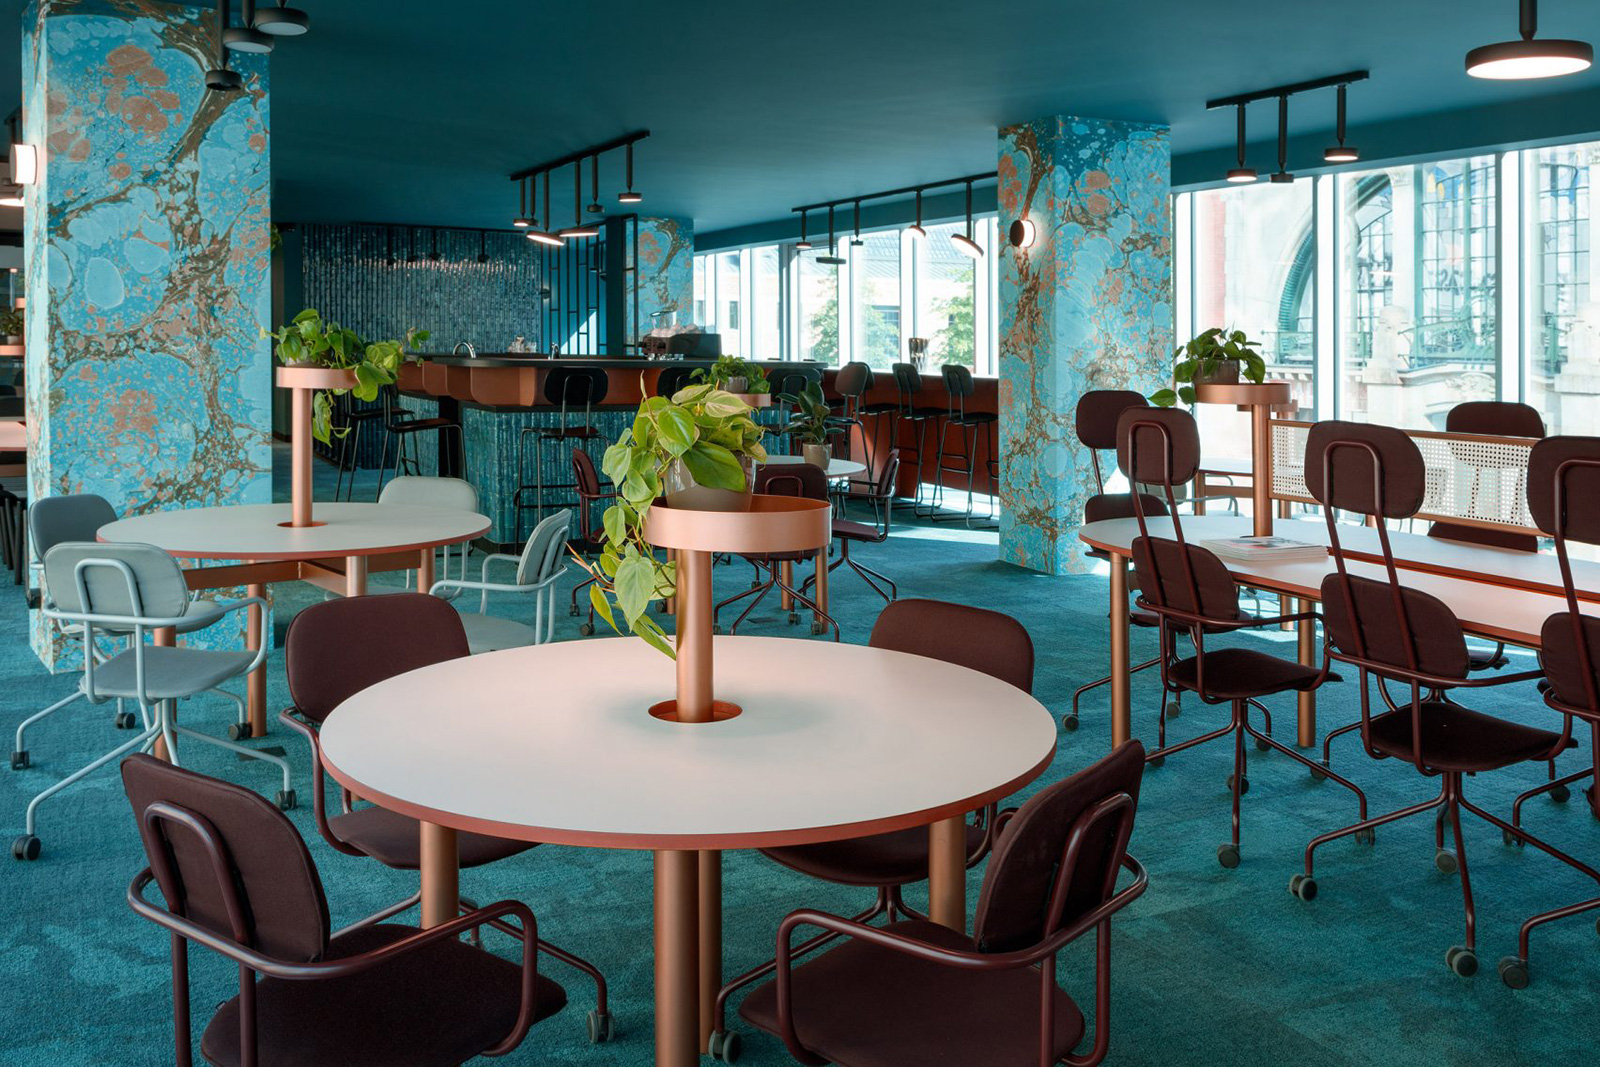 Move over millennial pink... Warsaw’s Nest coworking space is drenched in aqua blue